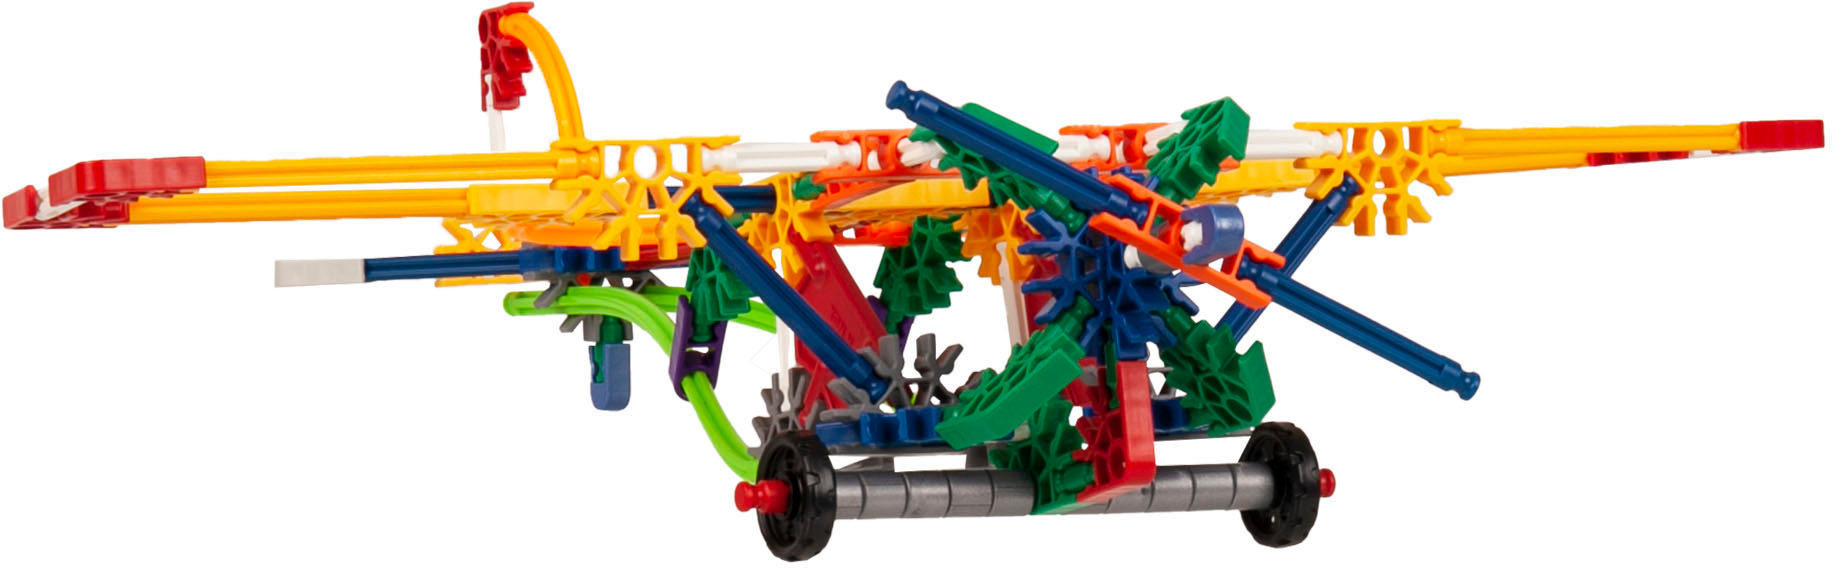 K'NEX - Click and Construct Value Building Set Tub - Engineering  Educational Toy